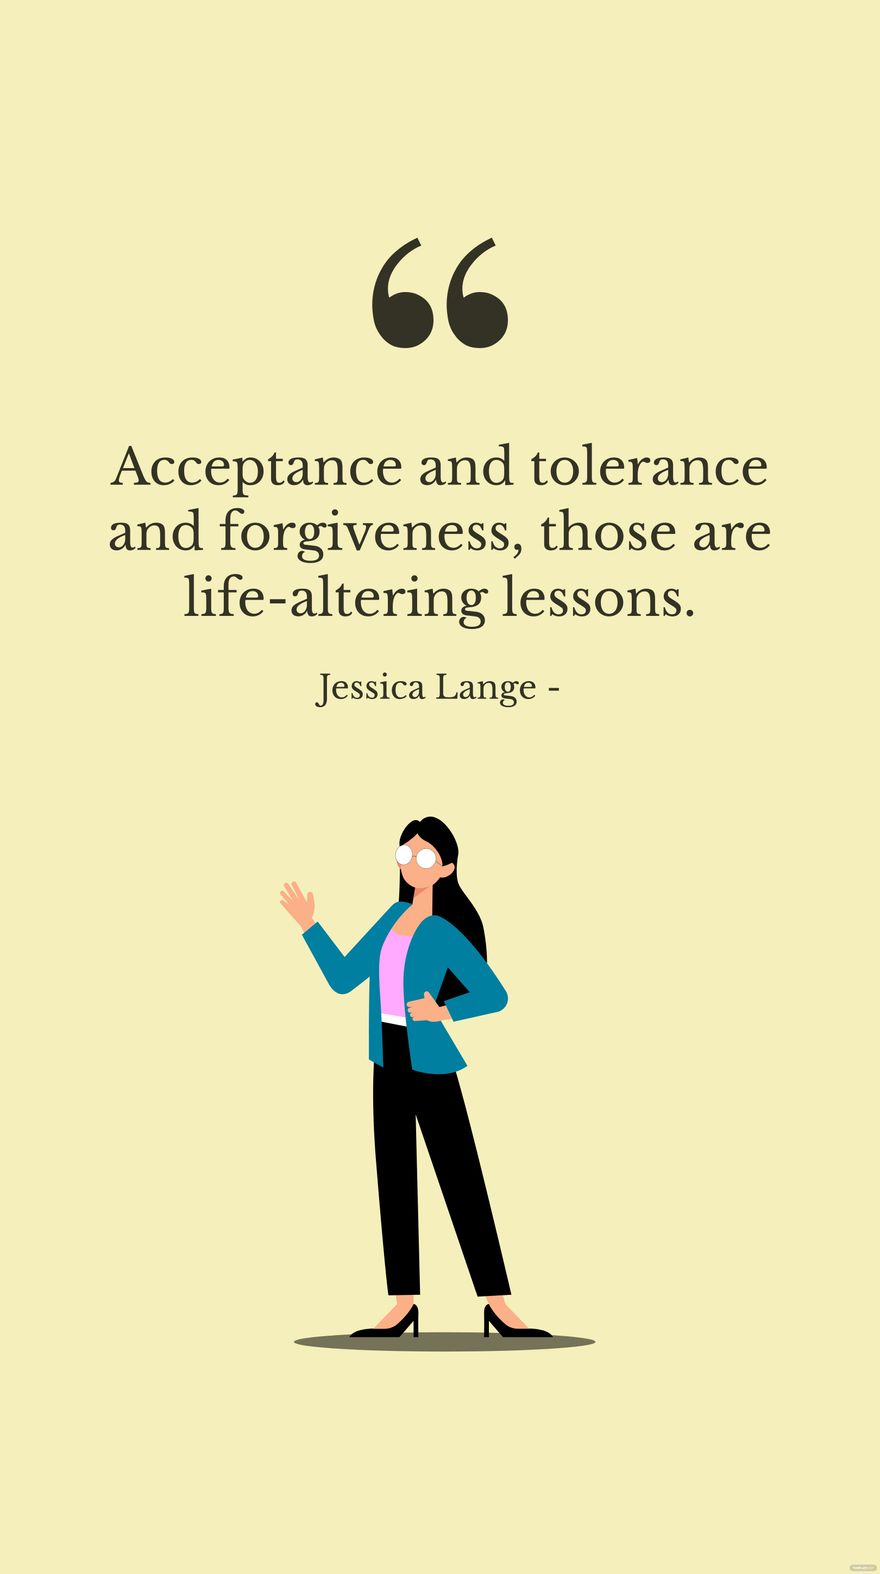 Jessica Lange - Acceptance and tolerance and forgiveness, those are life-altering lessons.